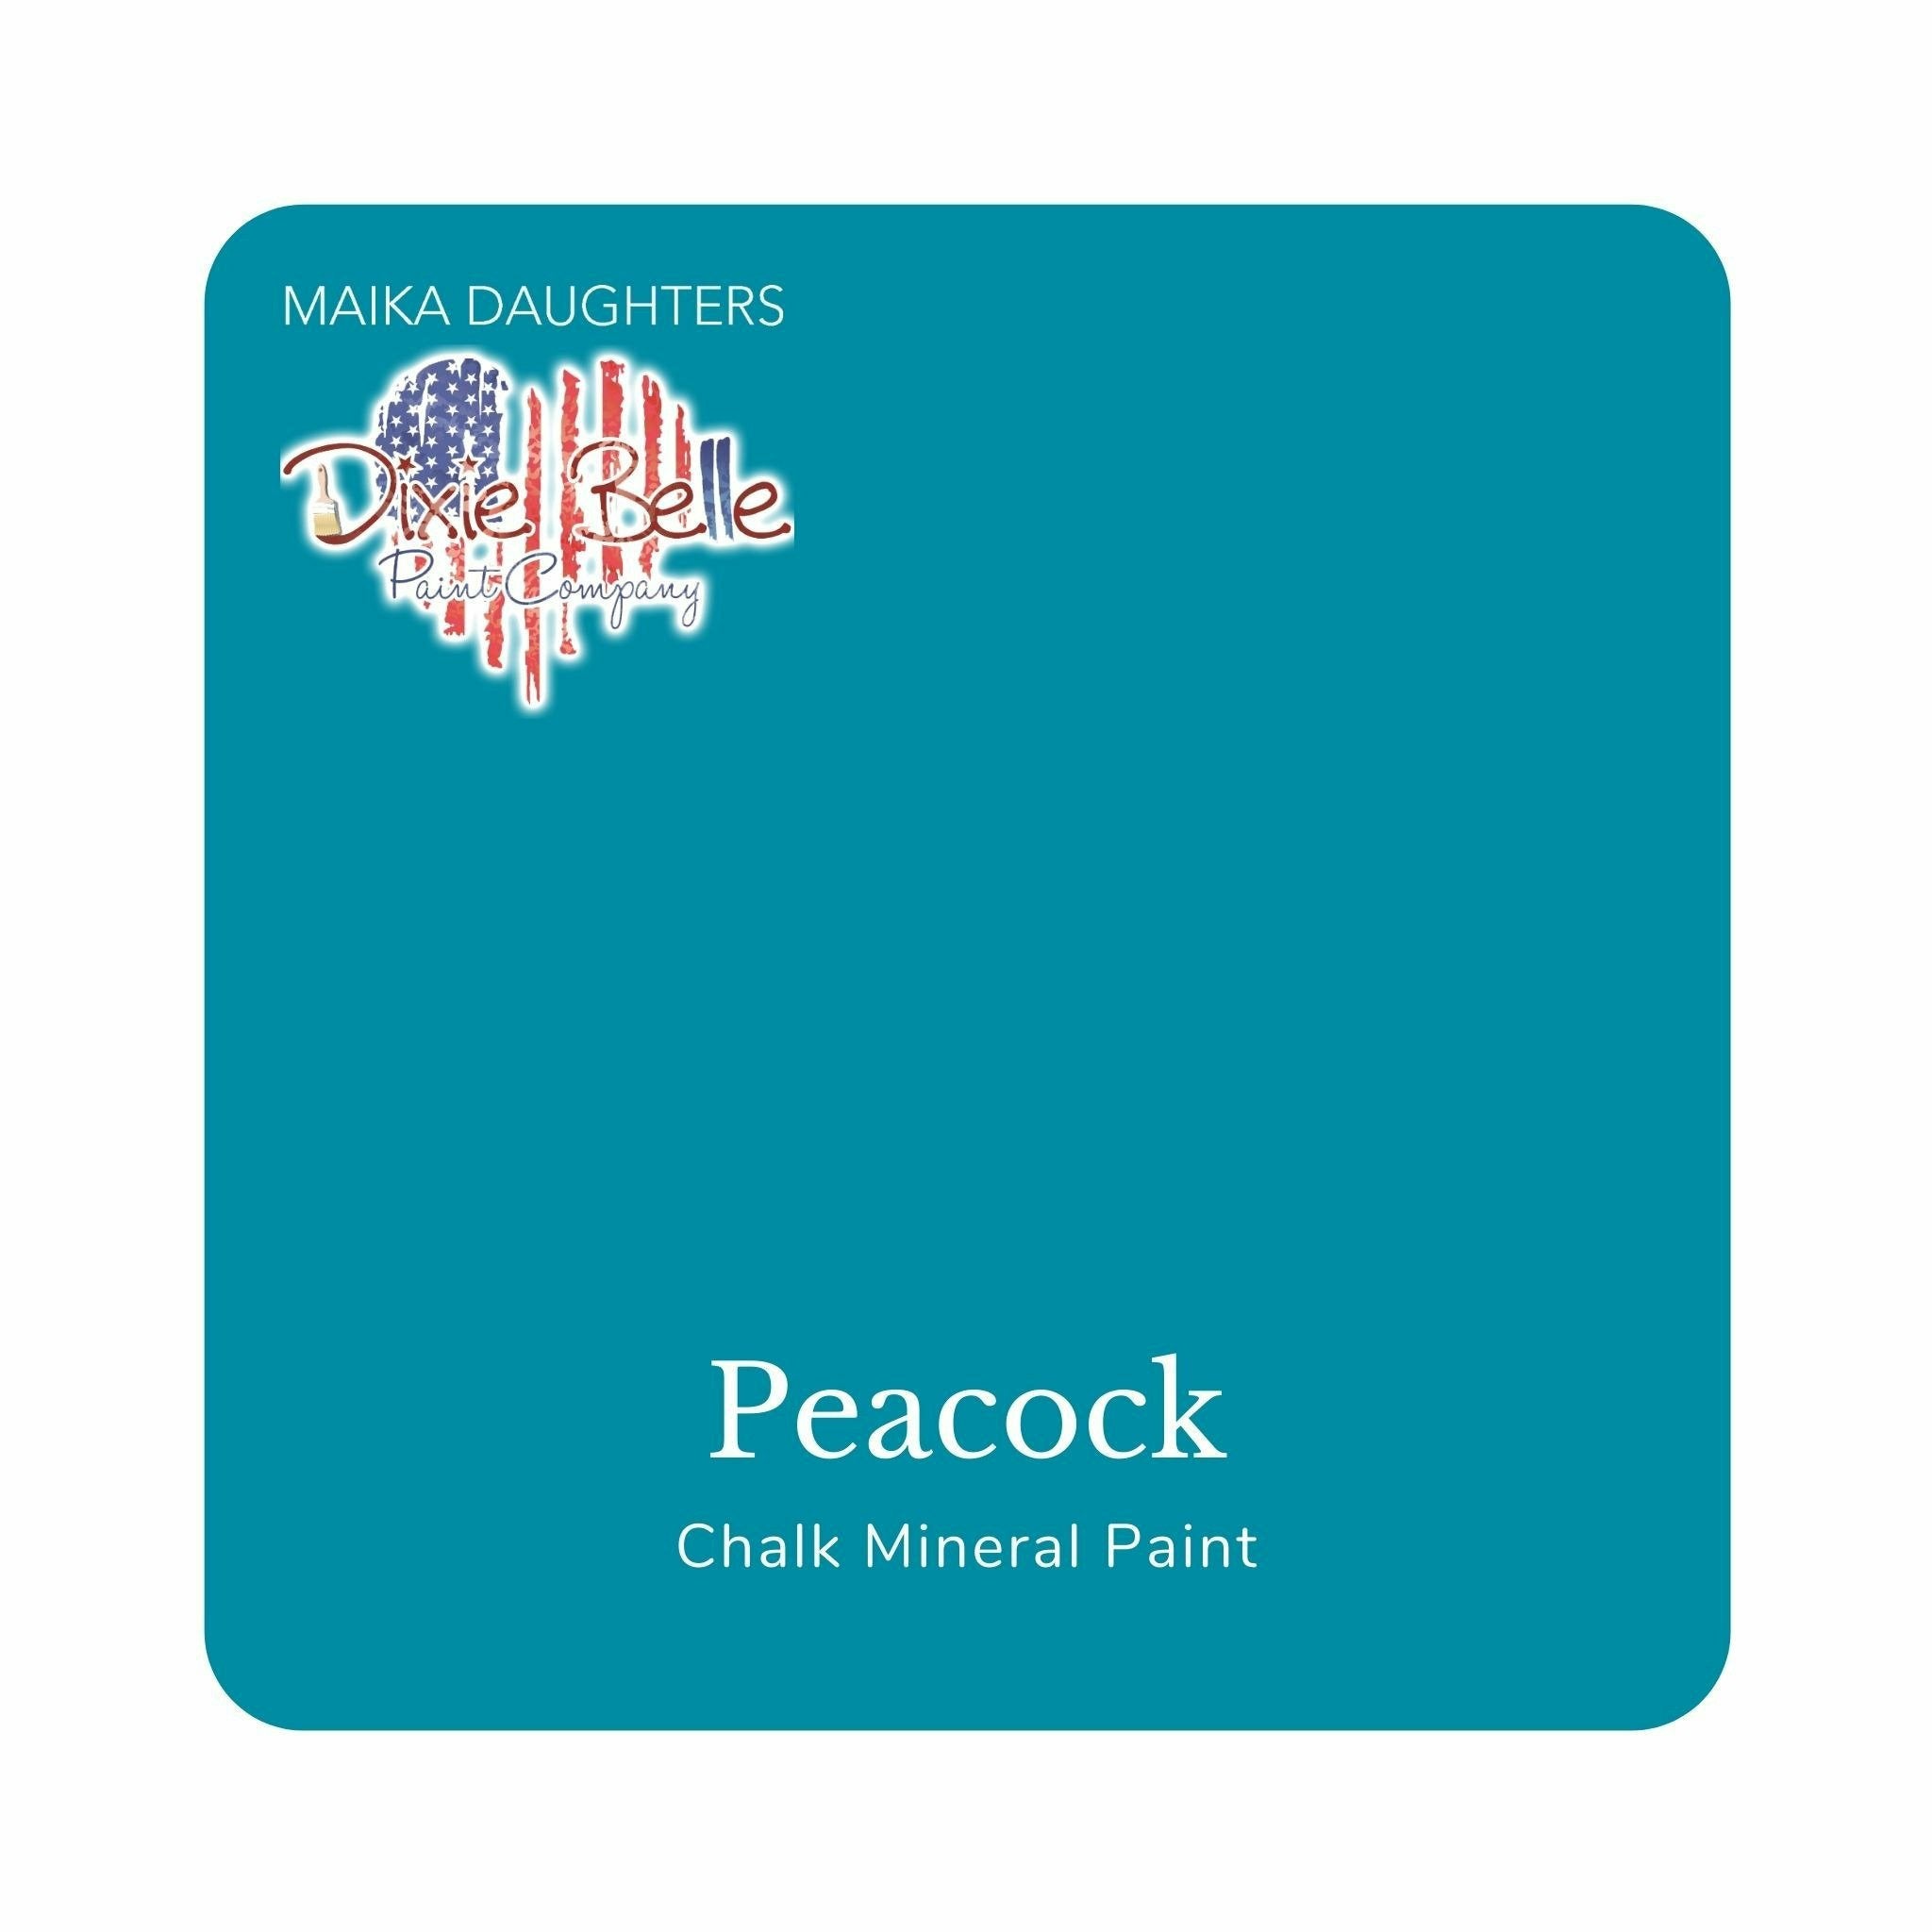 A square swatch card of Dixie Belle Paint Company’s Peacock Chalk Mineral Paint is against a white background. This color is a true teal.